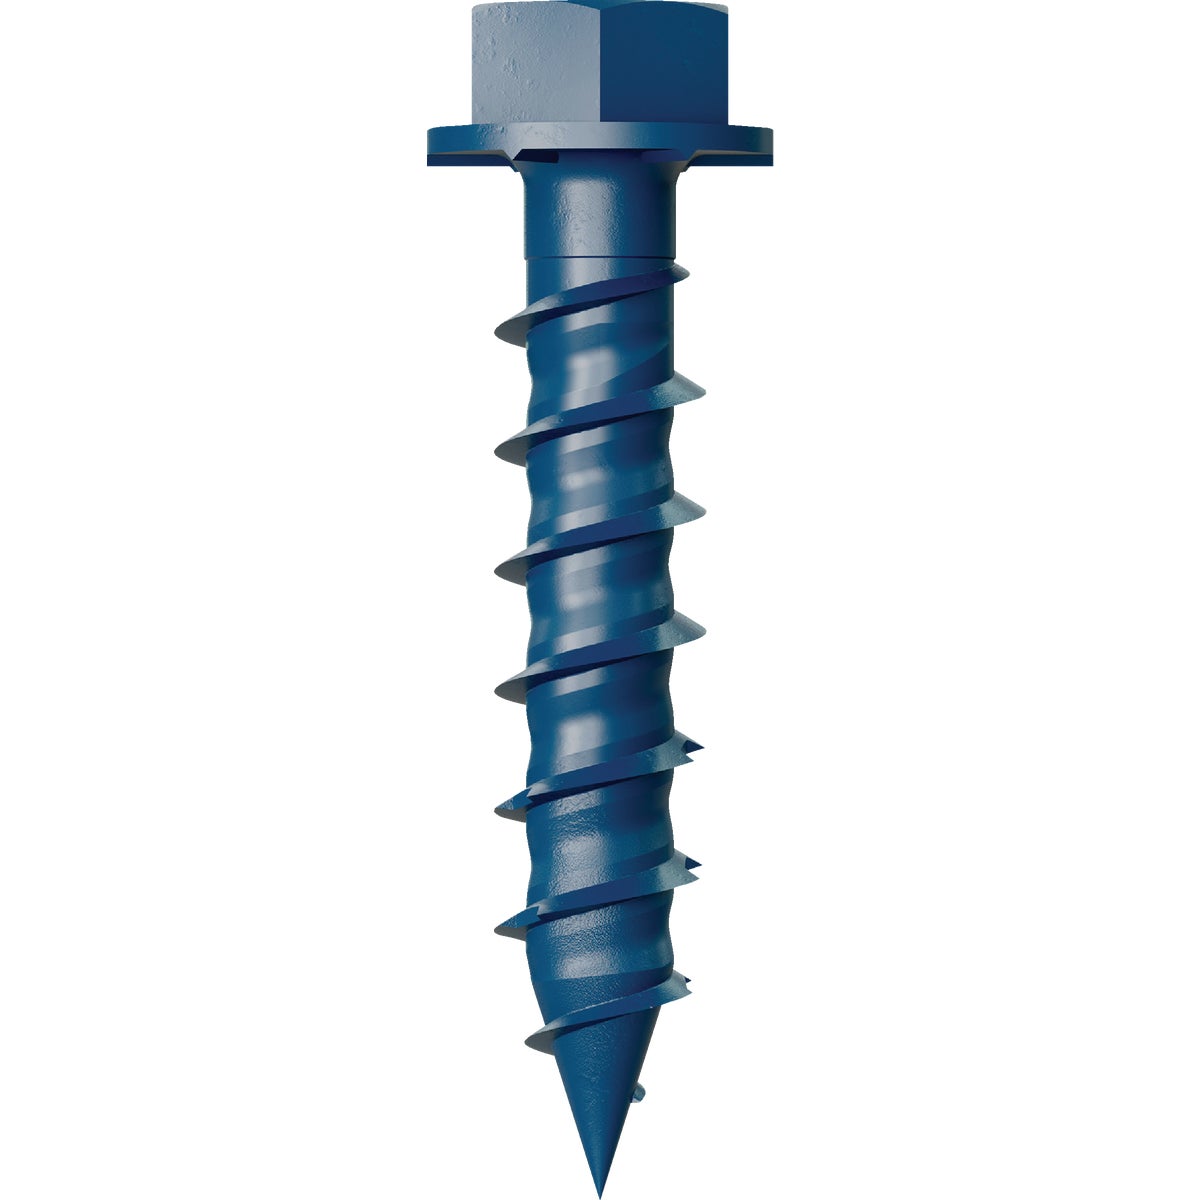 Simpson Strong-Tie Titen Turbo  1/4 in. x 1-1/4 in. Hex-Head Concrete and Masonry Screw, Blue (100-Qty)